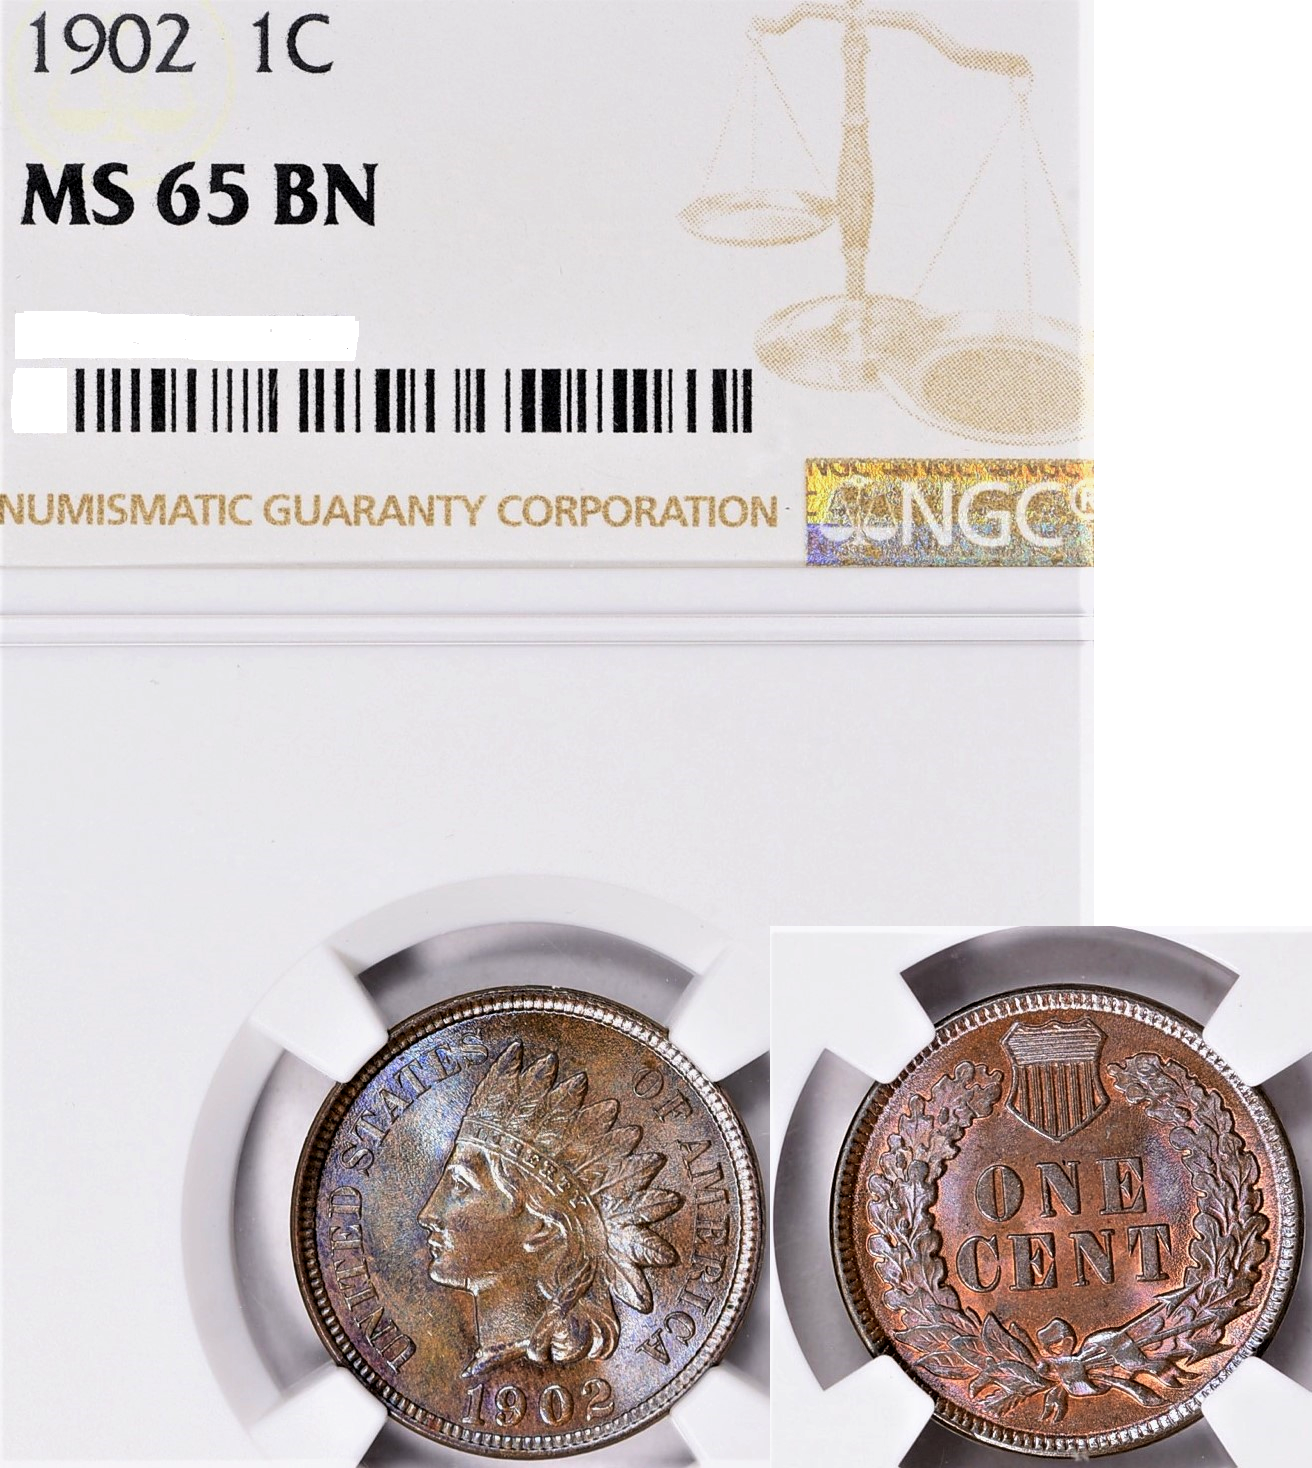 1902-NGC-MS65-BN-OBV-7-26-20 Obv PennyLady Combo.png